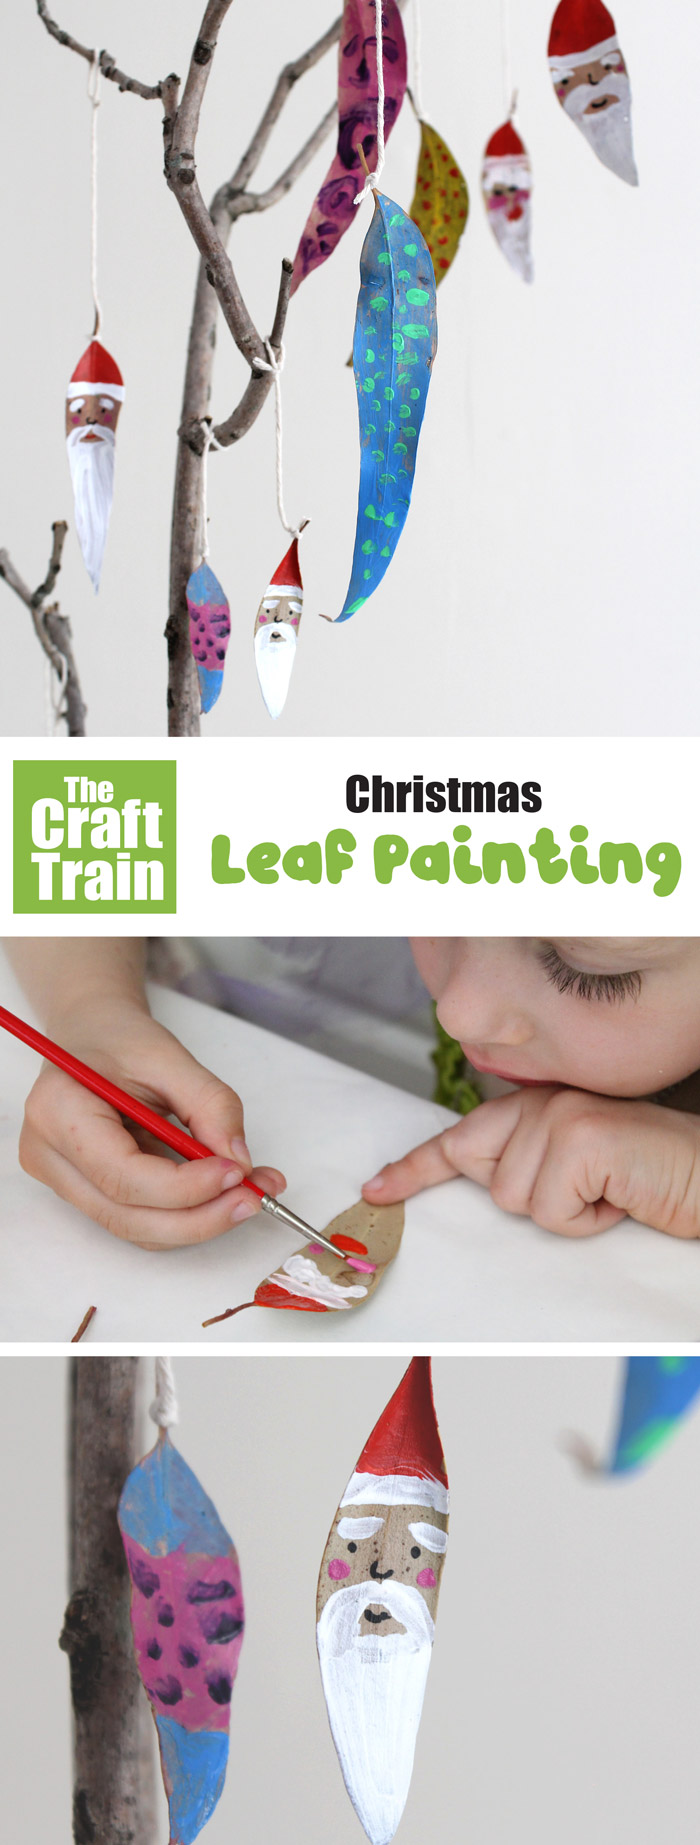 Easy Christmas leaf painting activity for kids of all ages. This is a fabulous collaborative Christmas craft idea for groups of kids or families.